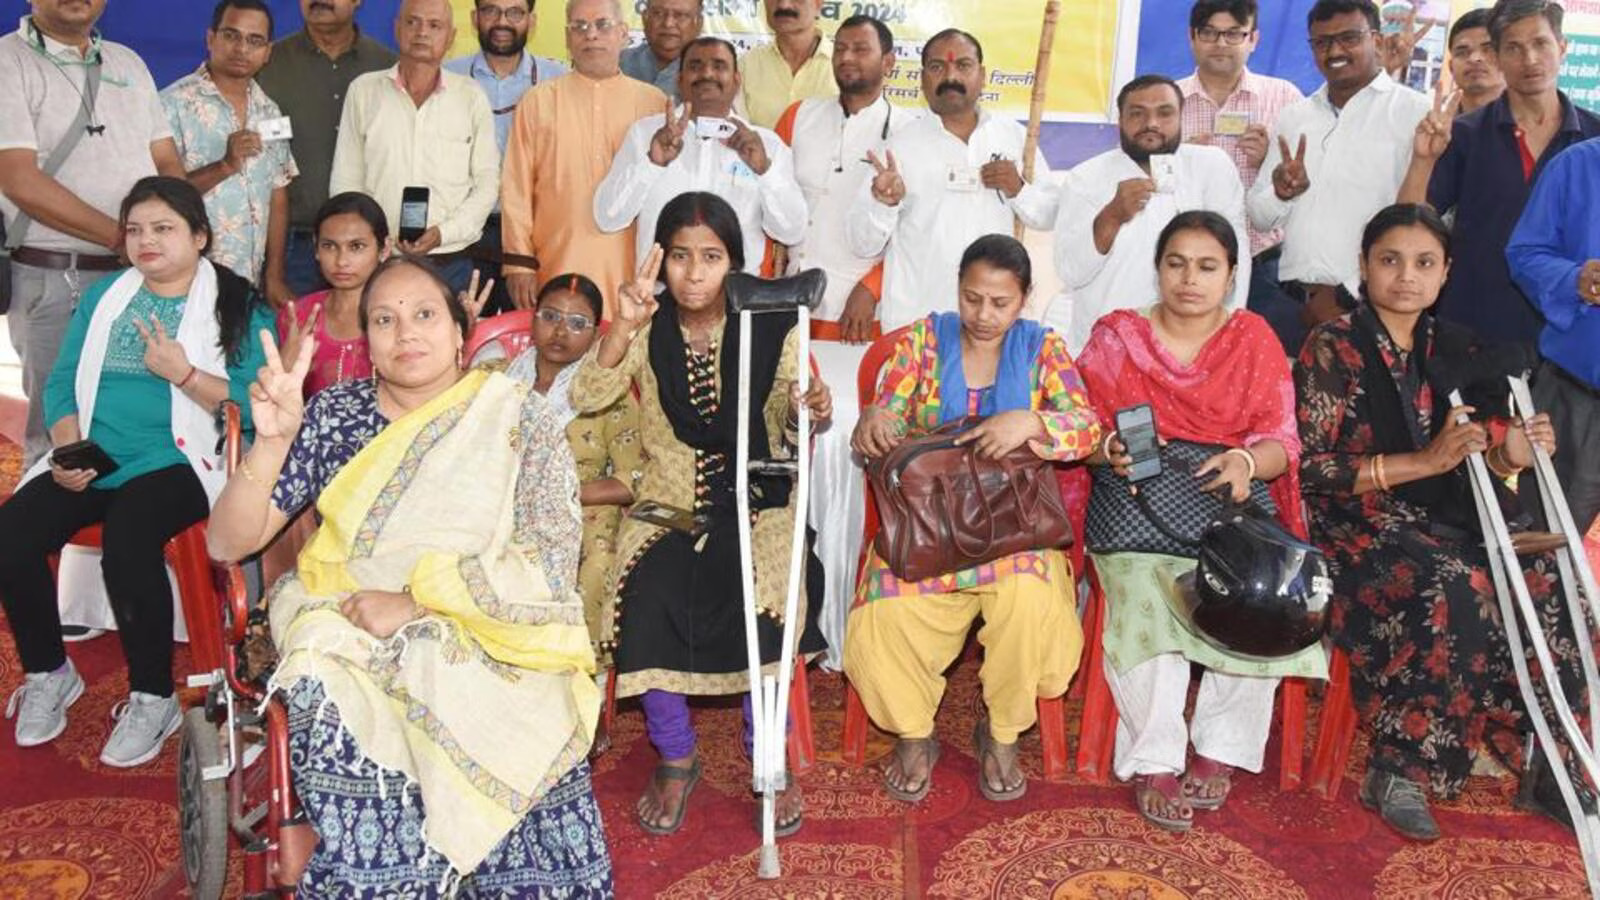 Noida’s Historic Vote from Home: Over 300 Seniors and Disabled Citizens Cast Ballots